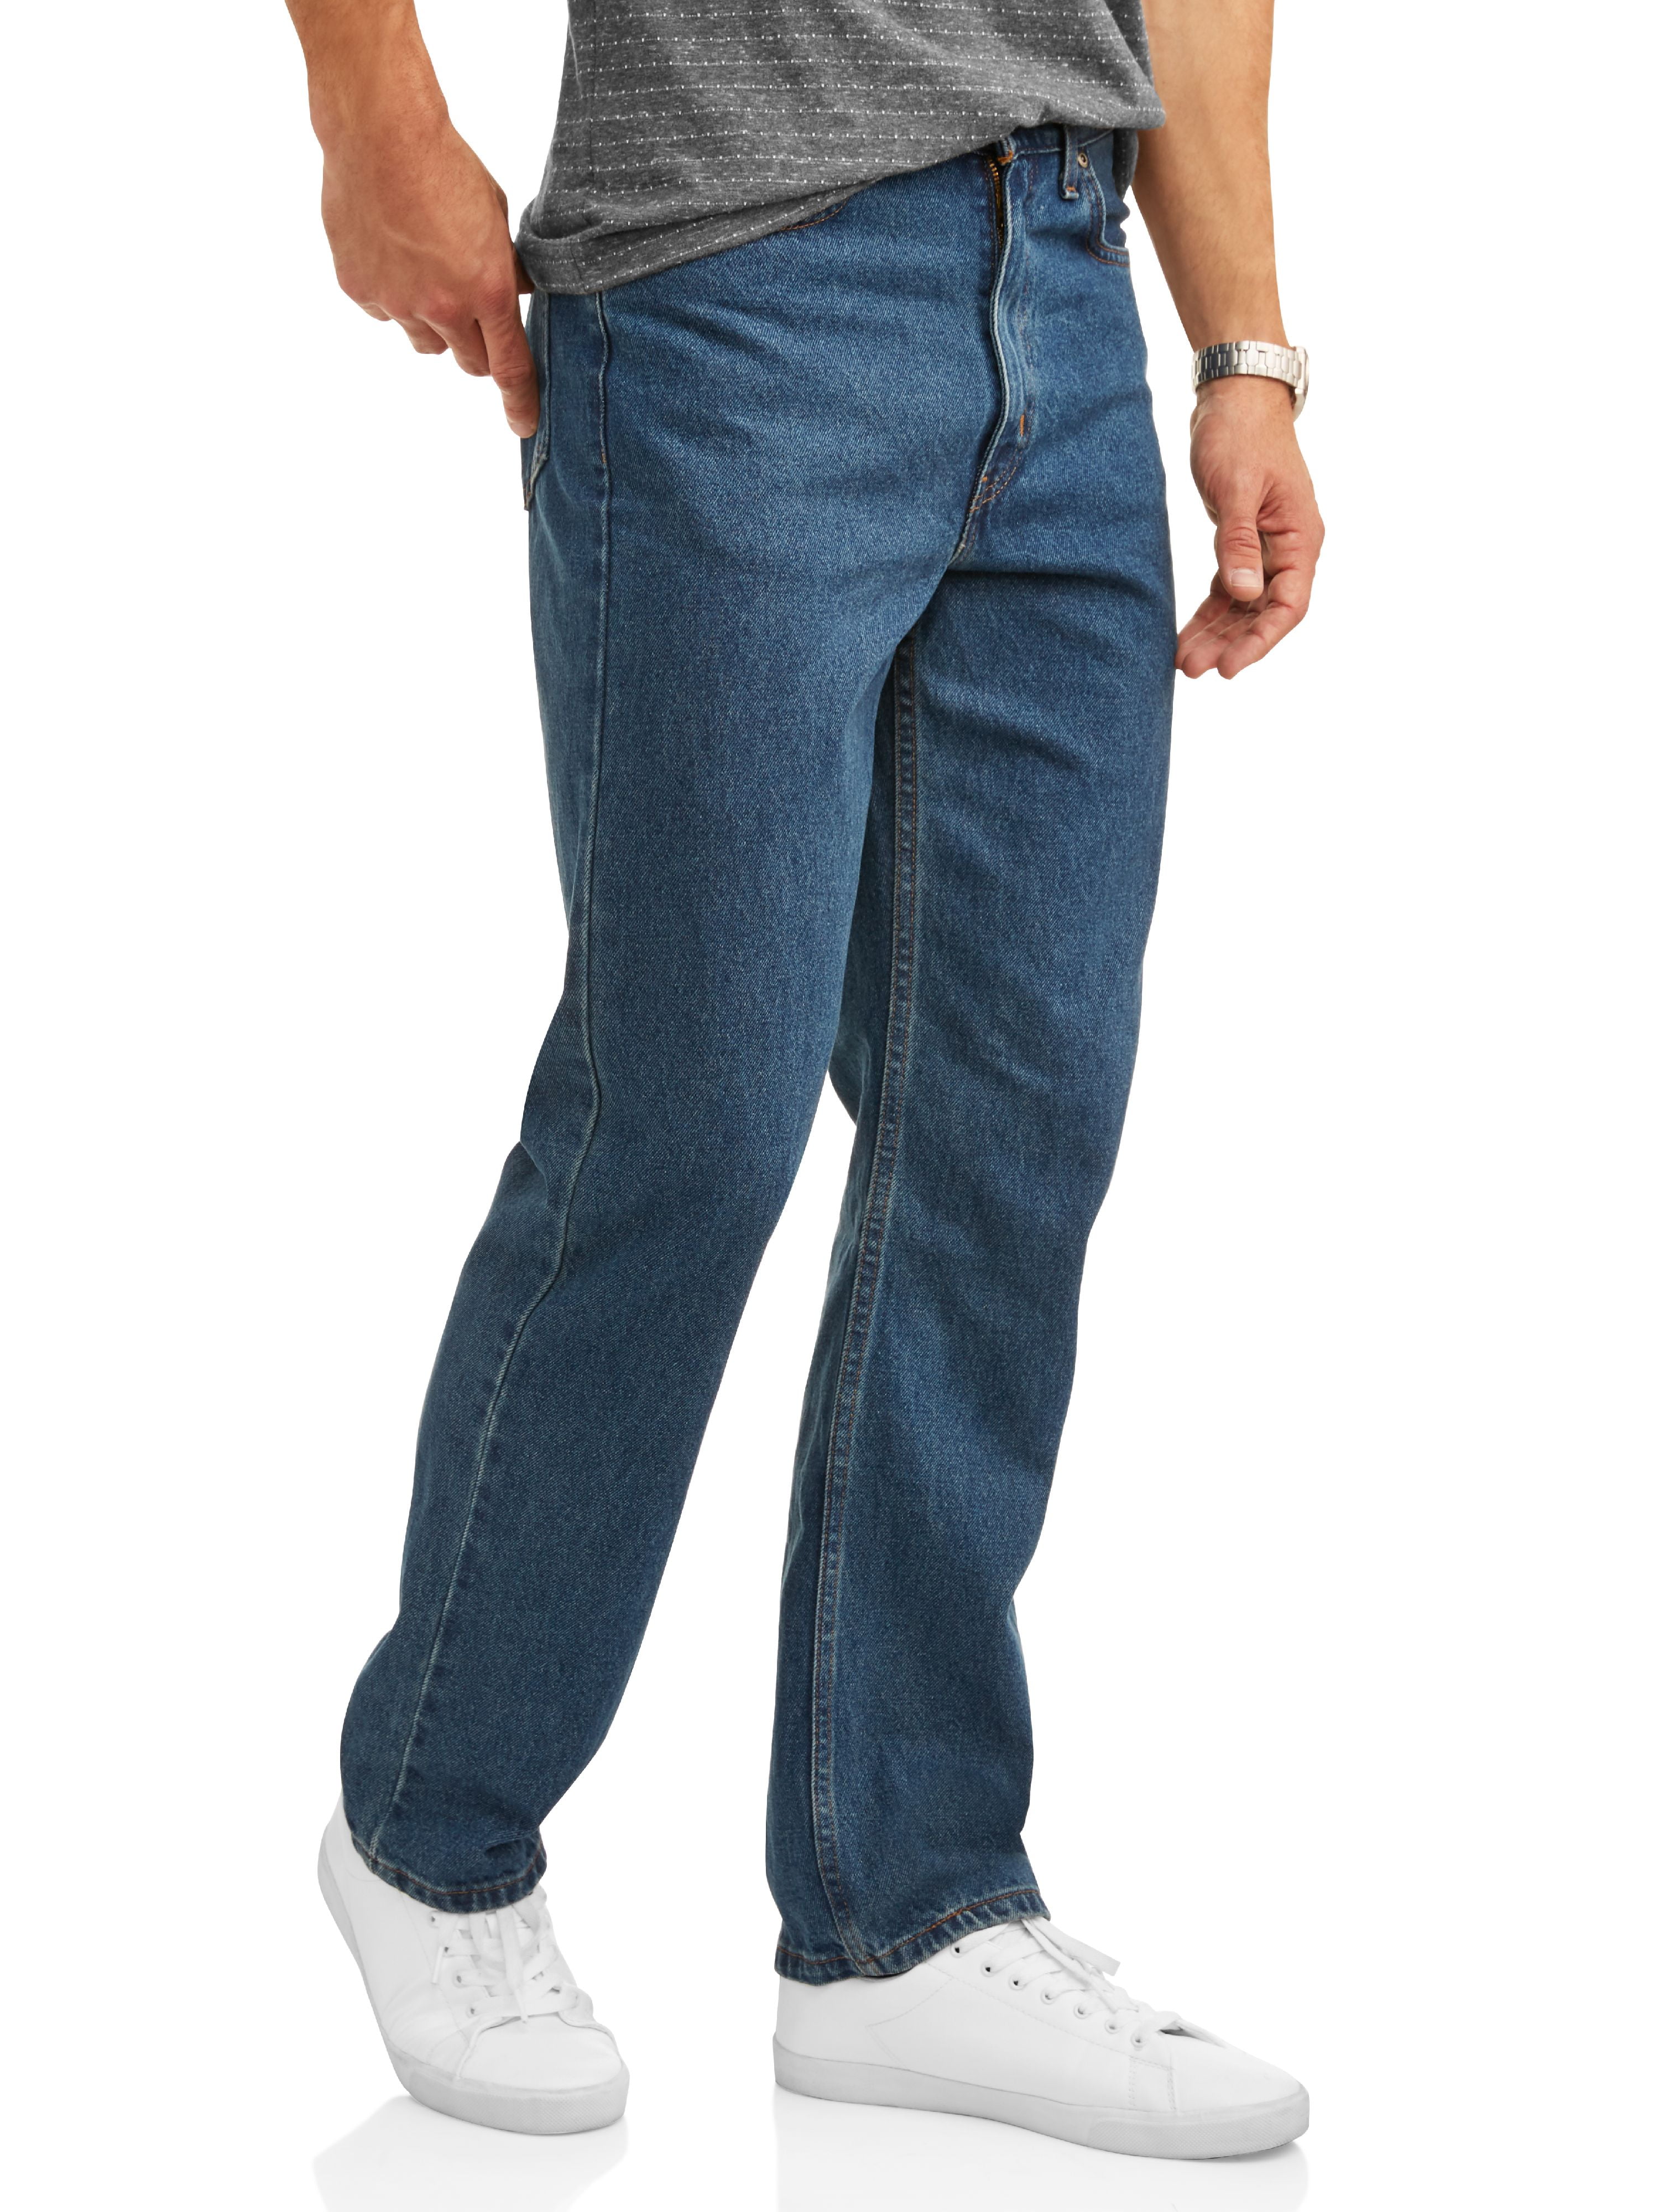 George Men's And Big Men's Relaxed Fit Jeans | lupon.gov.ph